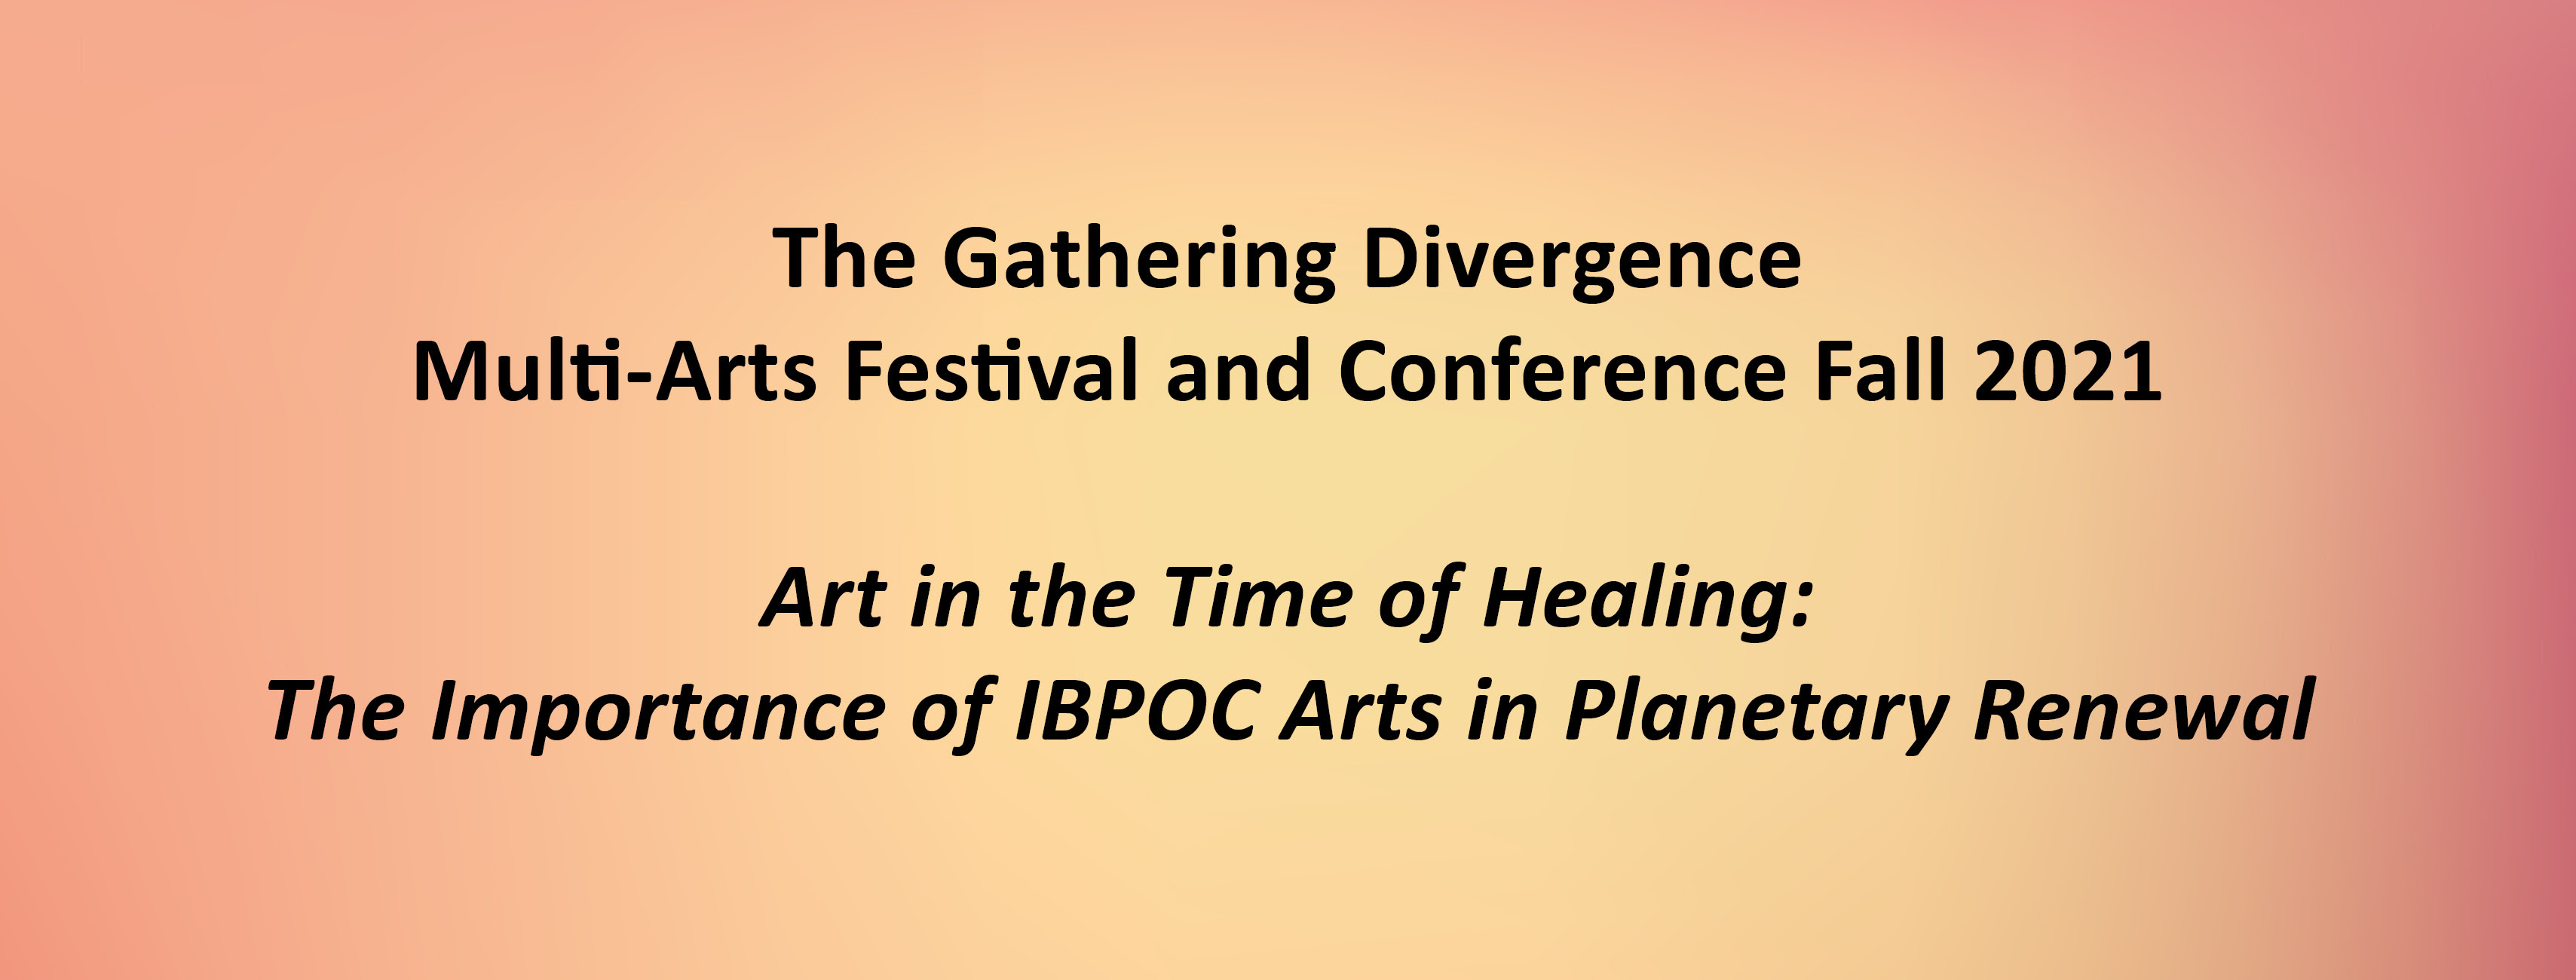 The Gathering Divergence  Multi-Arts Festival and Conference Fall 2021    Art in the Time of Healing:  The Importance of IBPOC Arts in Planetary Renewal